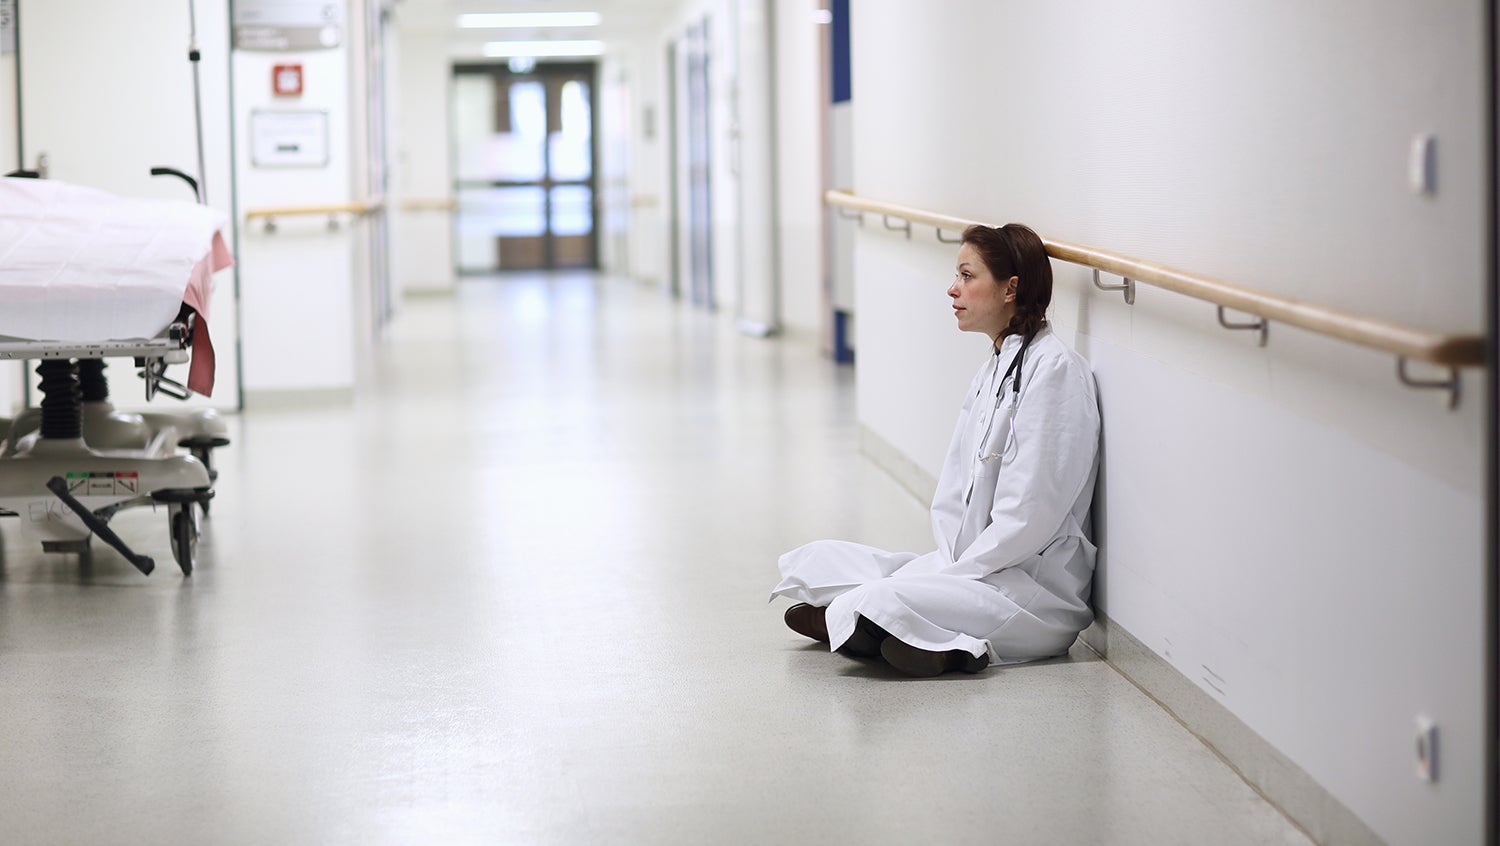 Doctor in white lab coat sits distressed on the floor of the hospital hallway